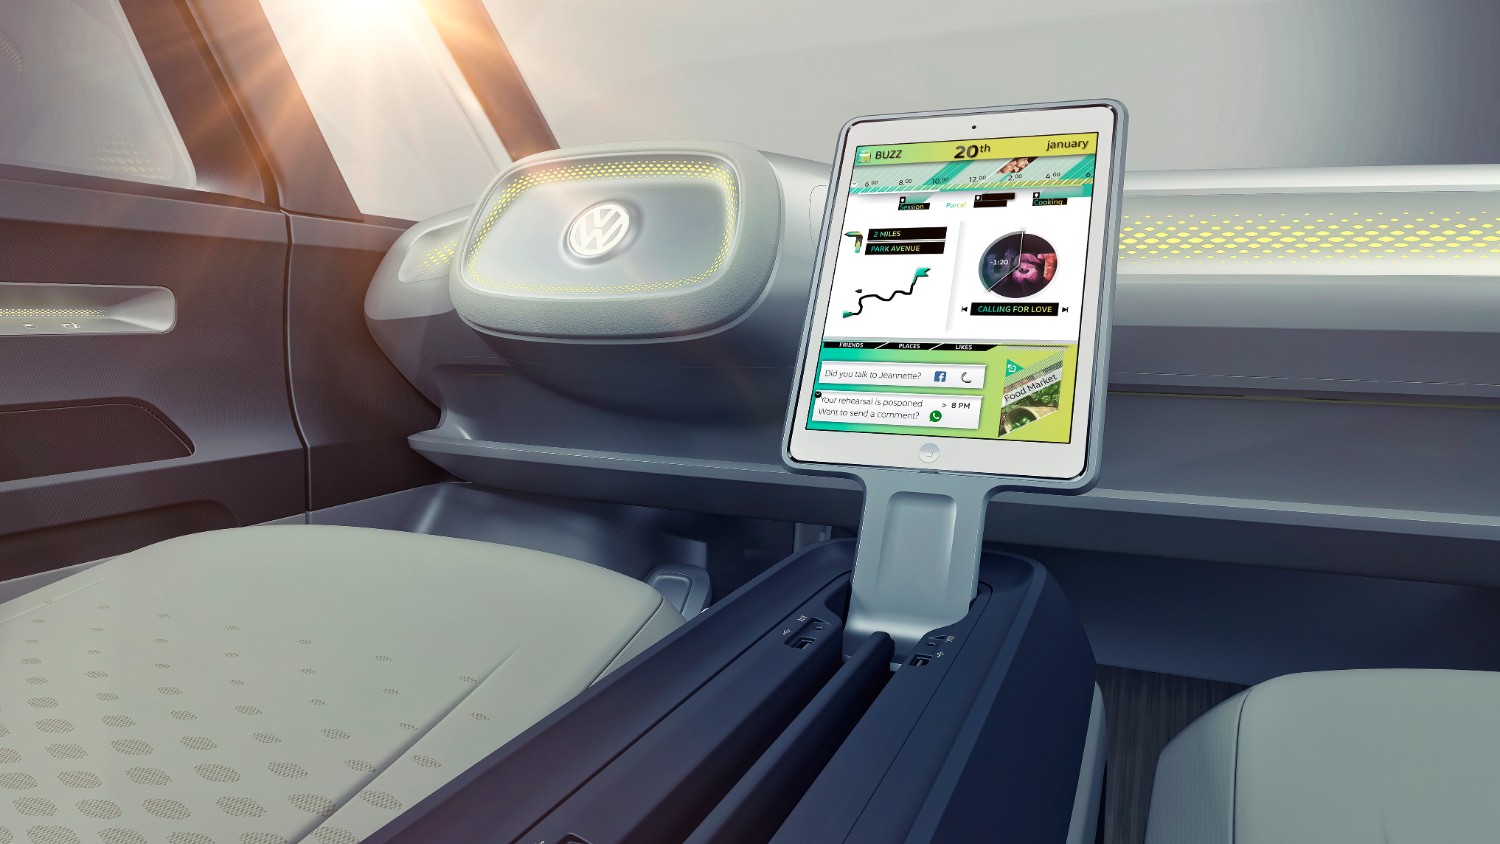 Technology included with Volkswagen's I.D. Buzz